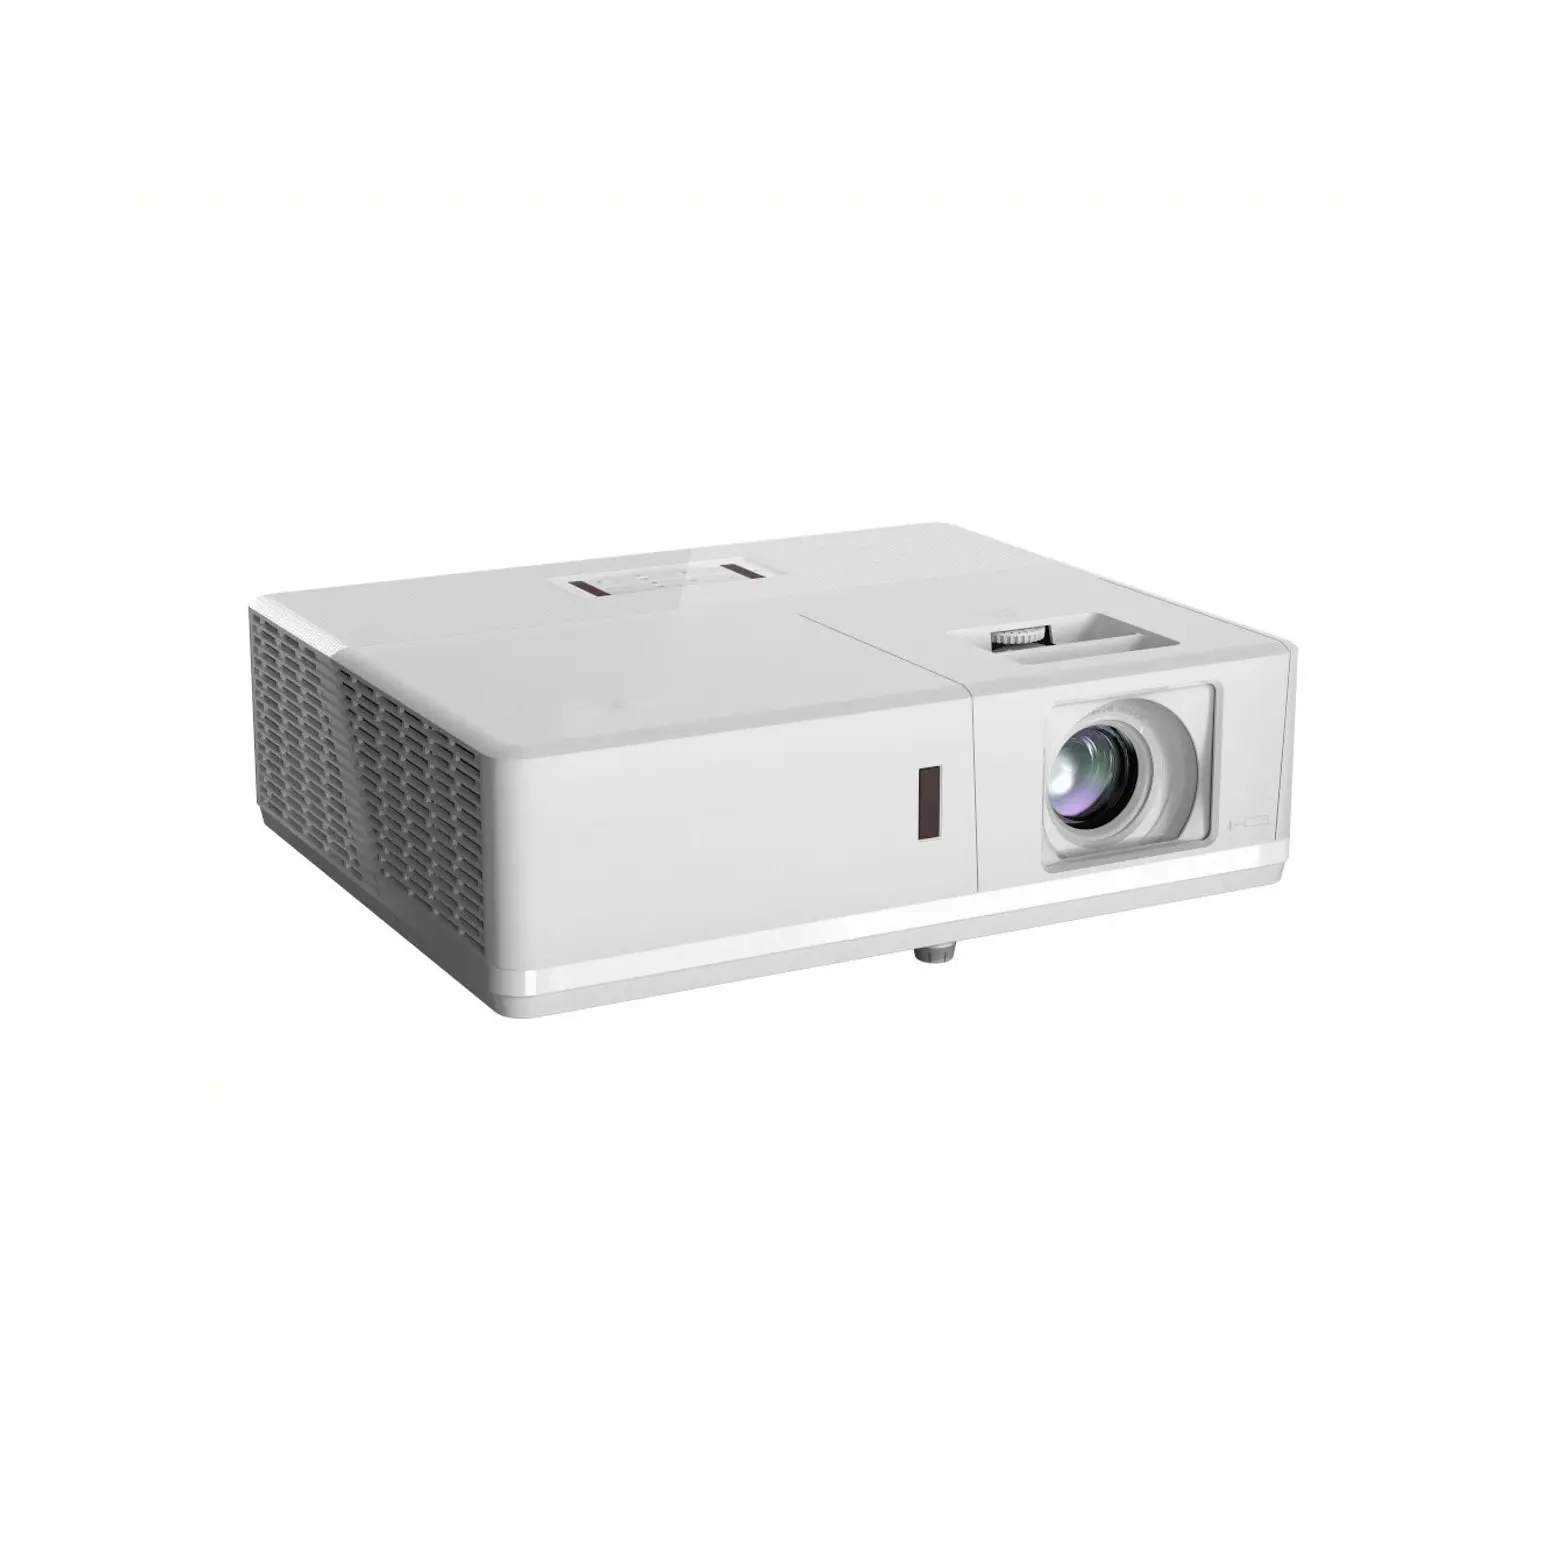 Multimedia Projector Led Video Television Projector Image Wireless Smart Mini Portable Outdoor Projectors